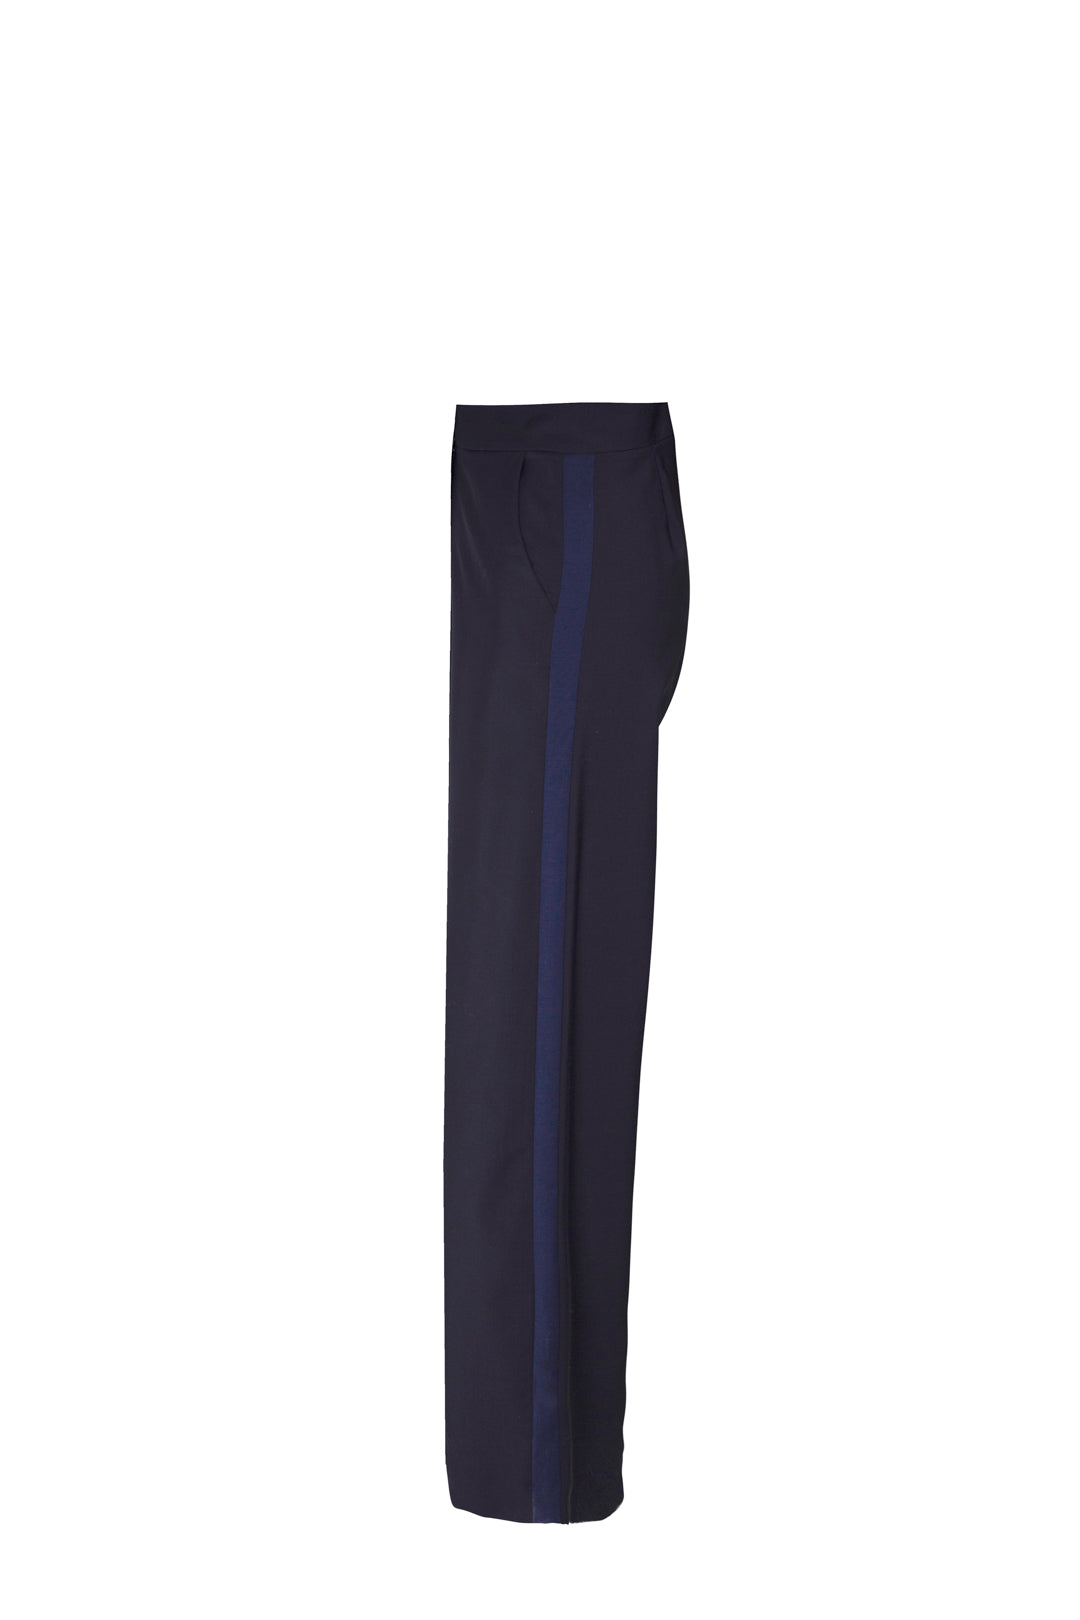 NAVY PALAZZO PANTS WITH CONTRASTING BLUE SIDE STRIPE